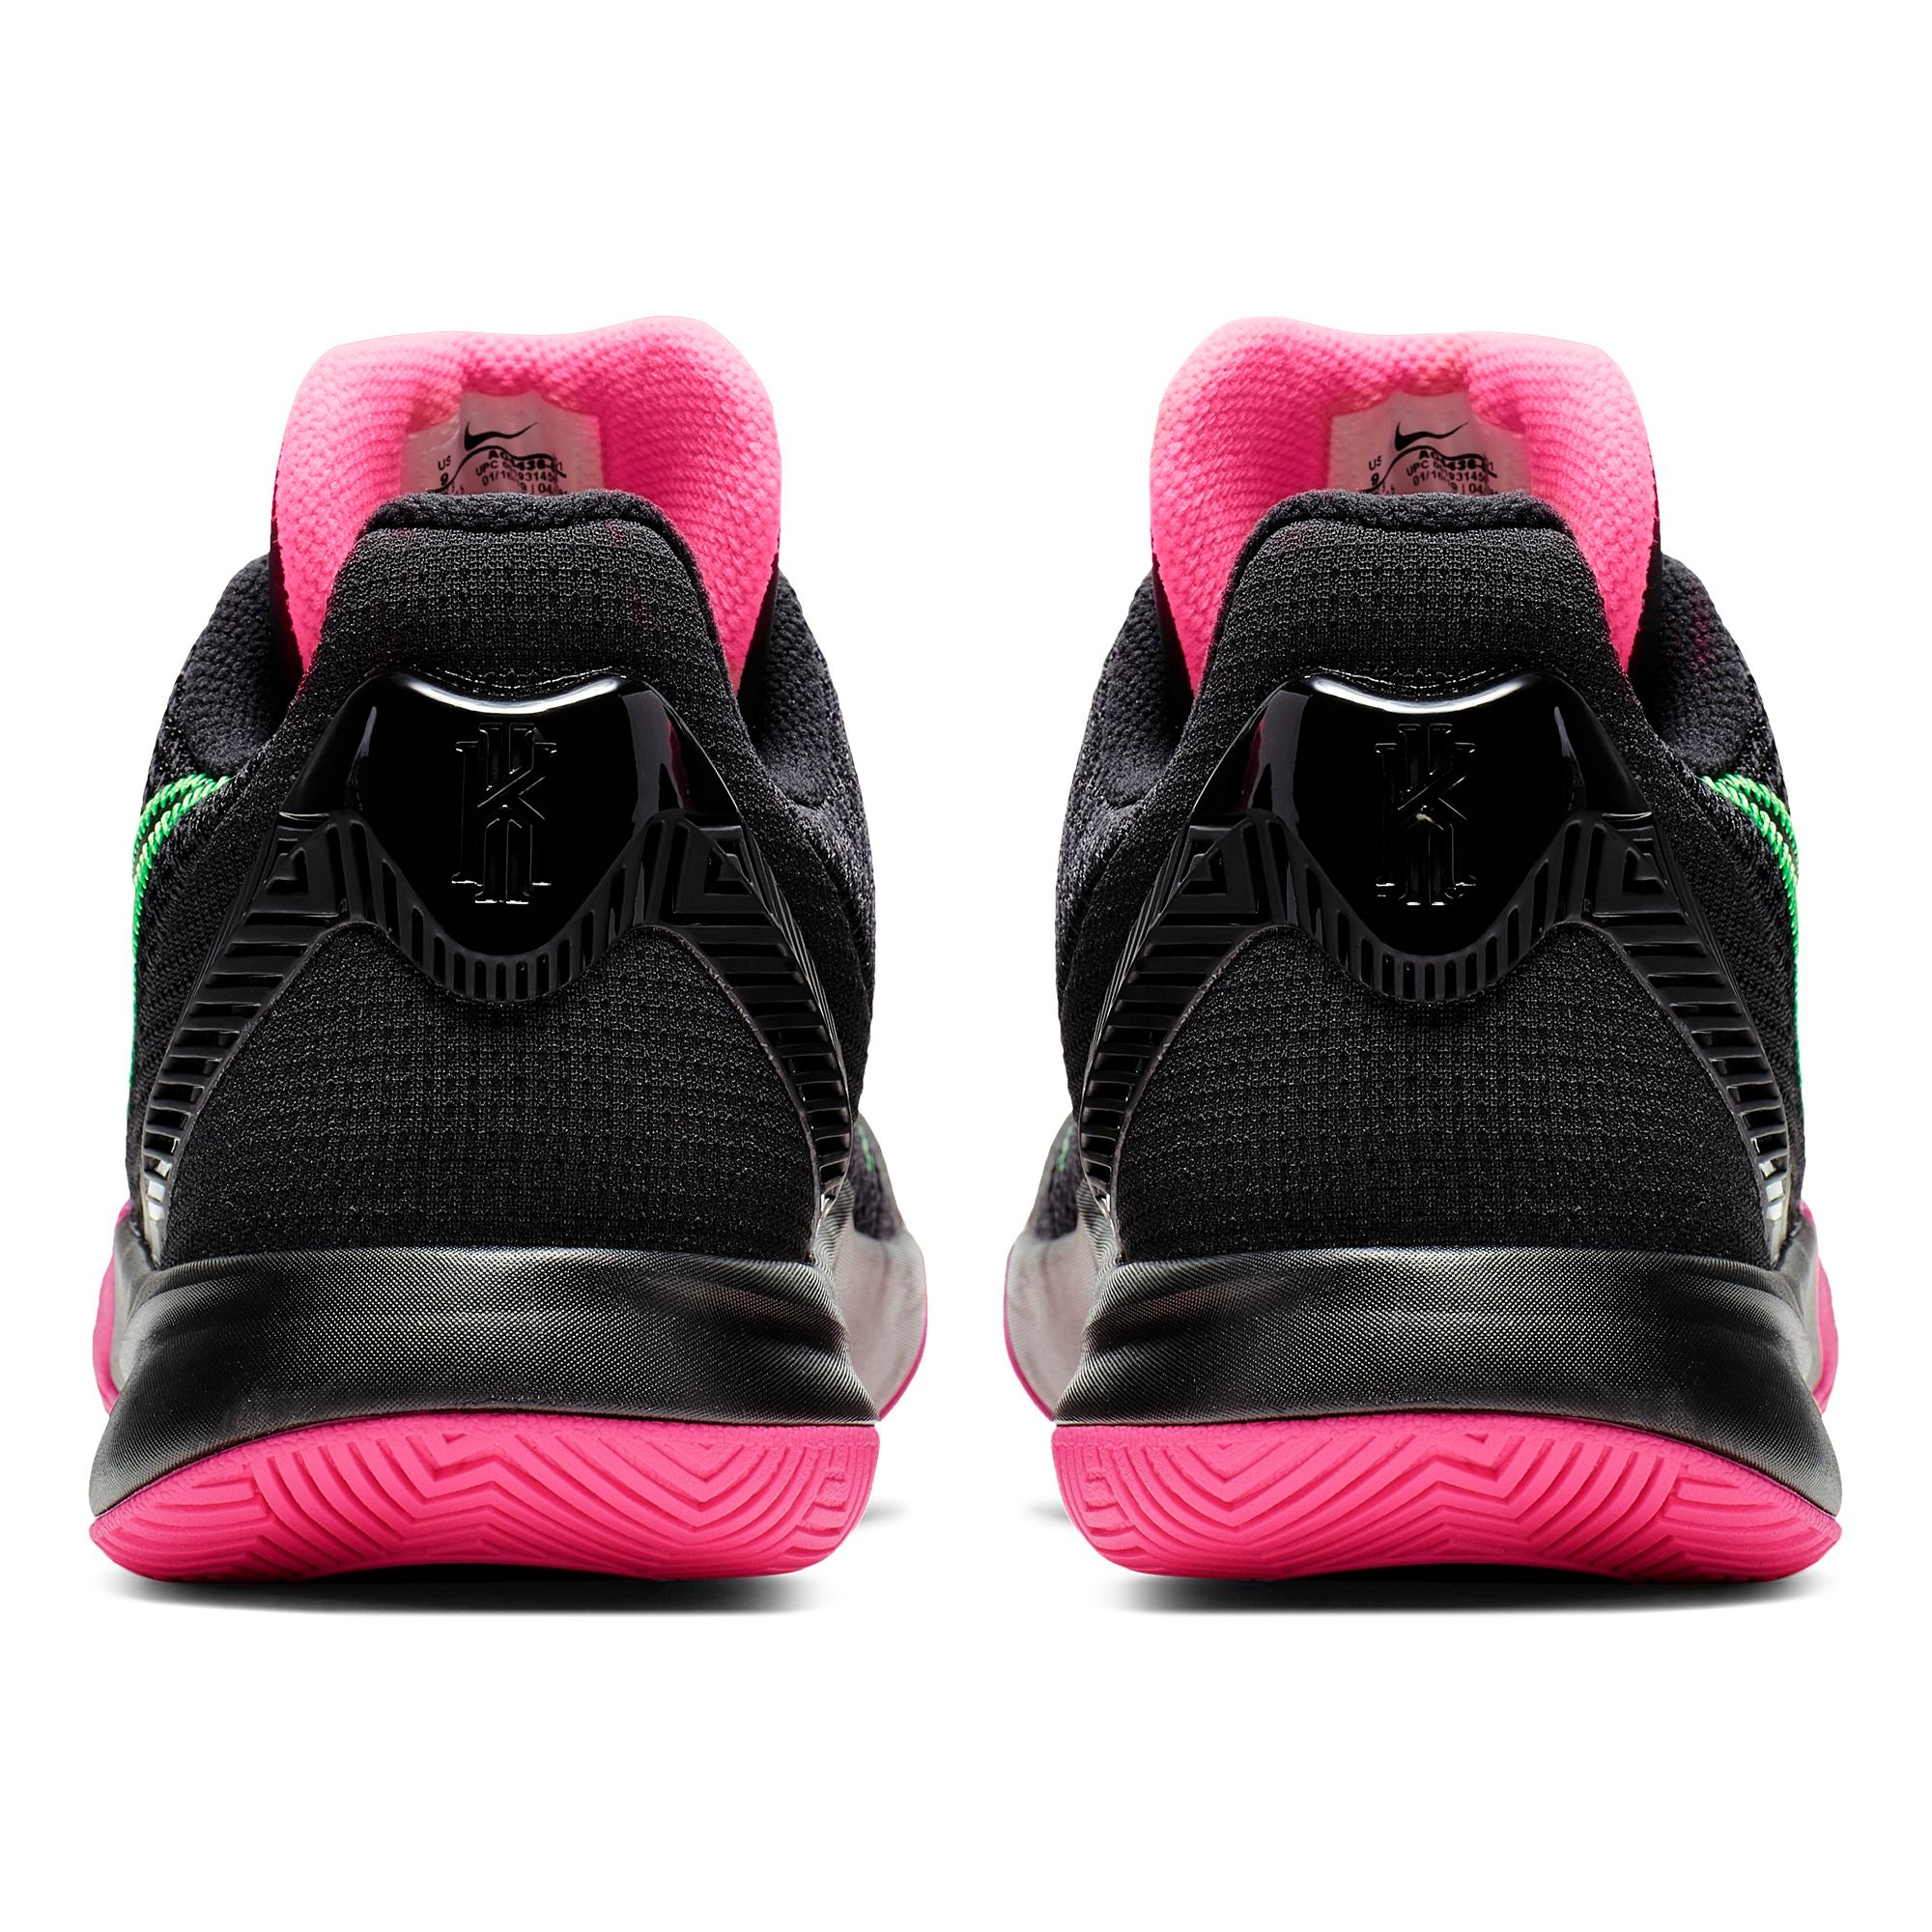 kyrie flytrap 2 pink and green